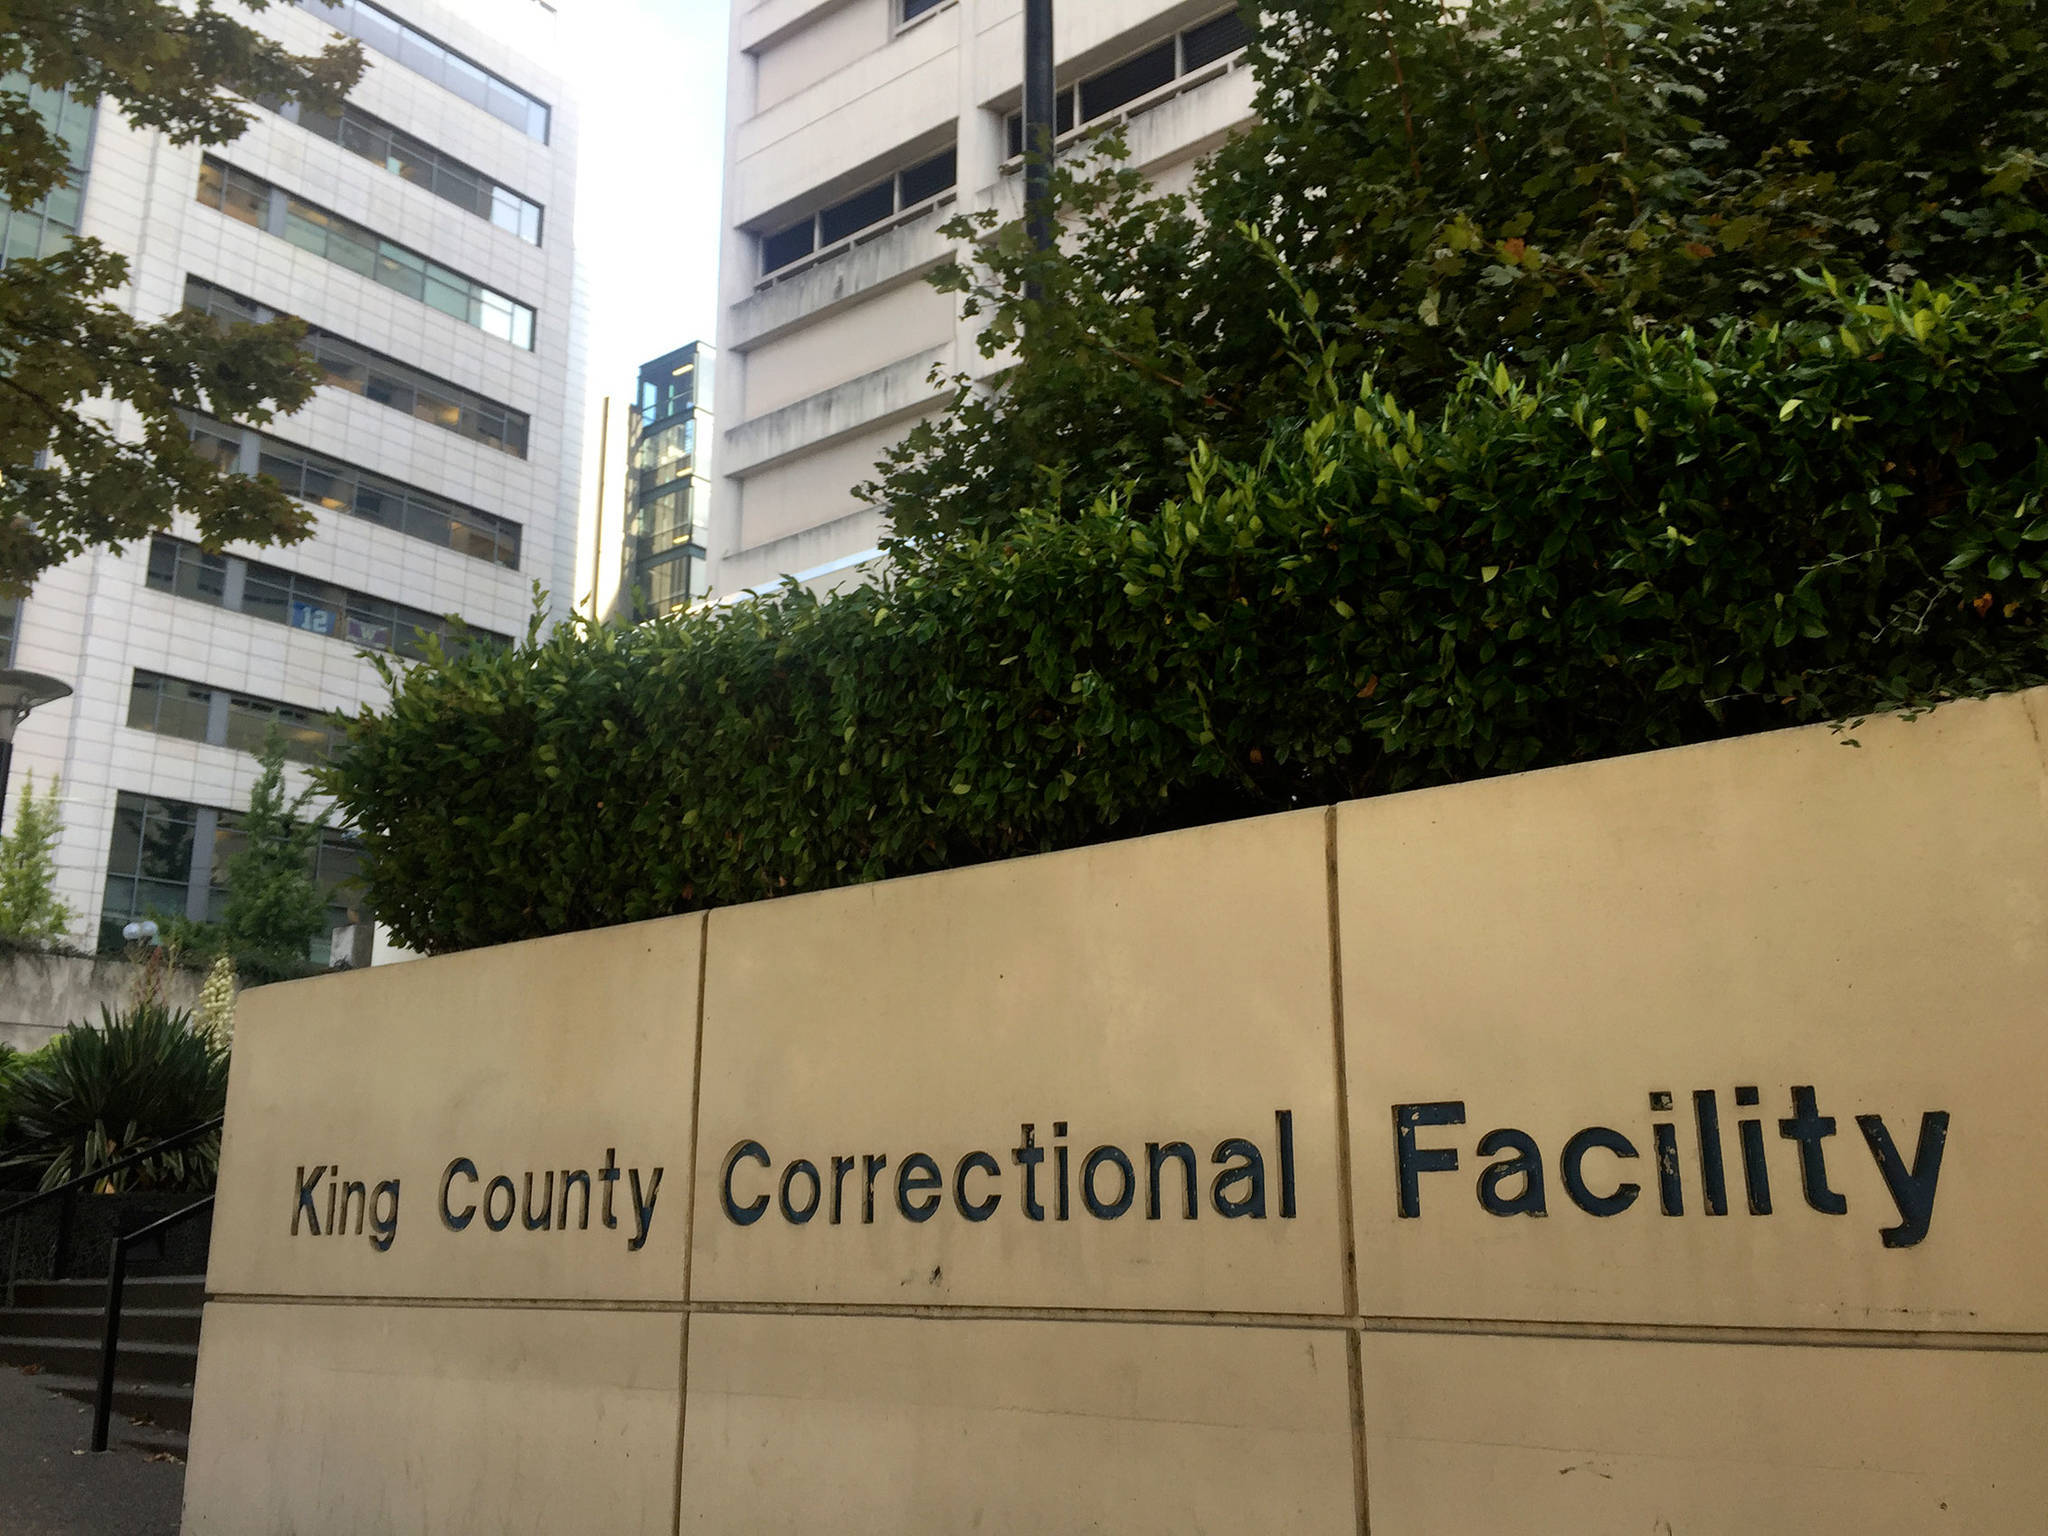 The Aquatherm pipes at the King County Correctional Facility have been leaking for years, prompting the county executive to ask for $23.5 million in emergency funding to replace them. Seattle. File photo